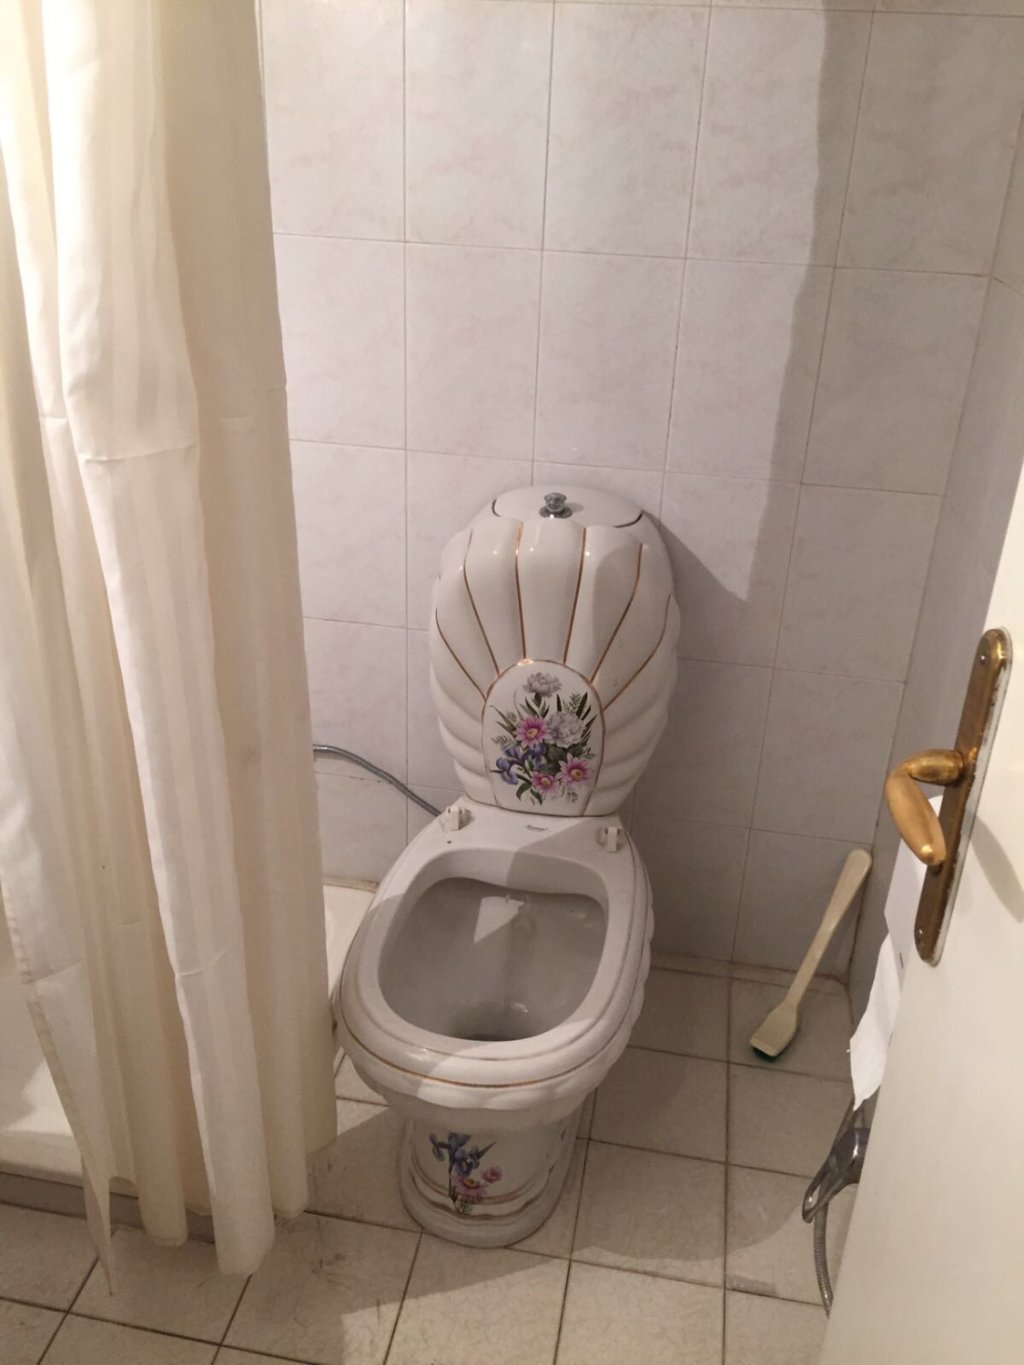 the-toilet-without-plate.jpg